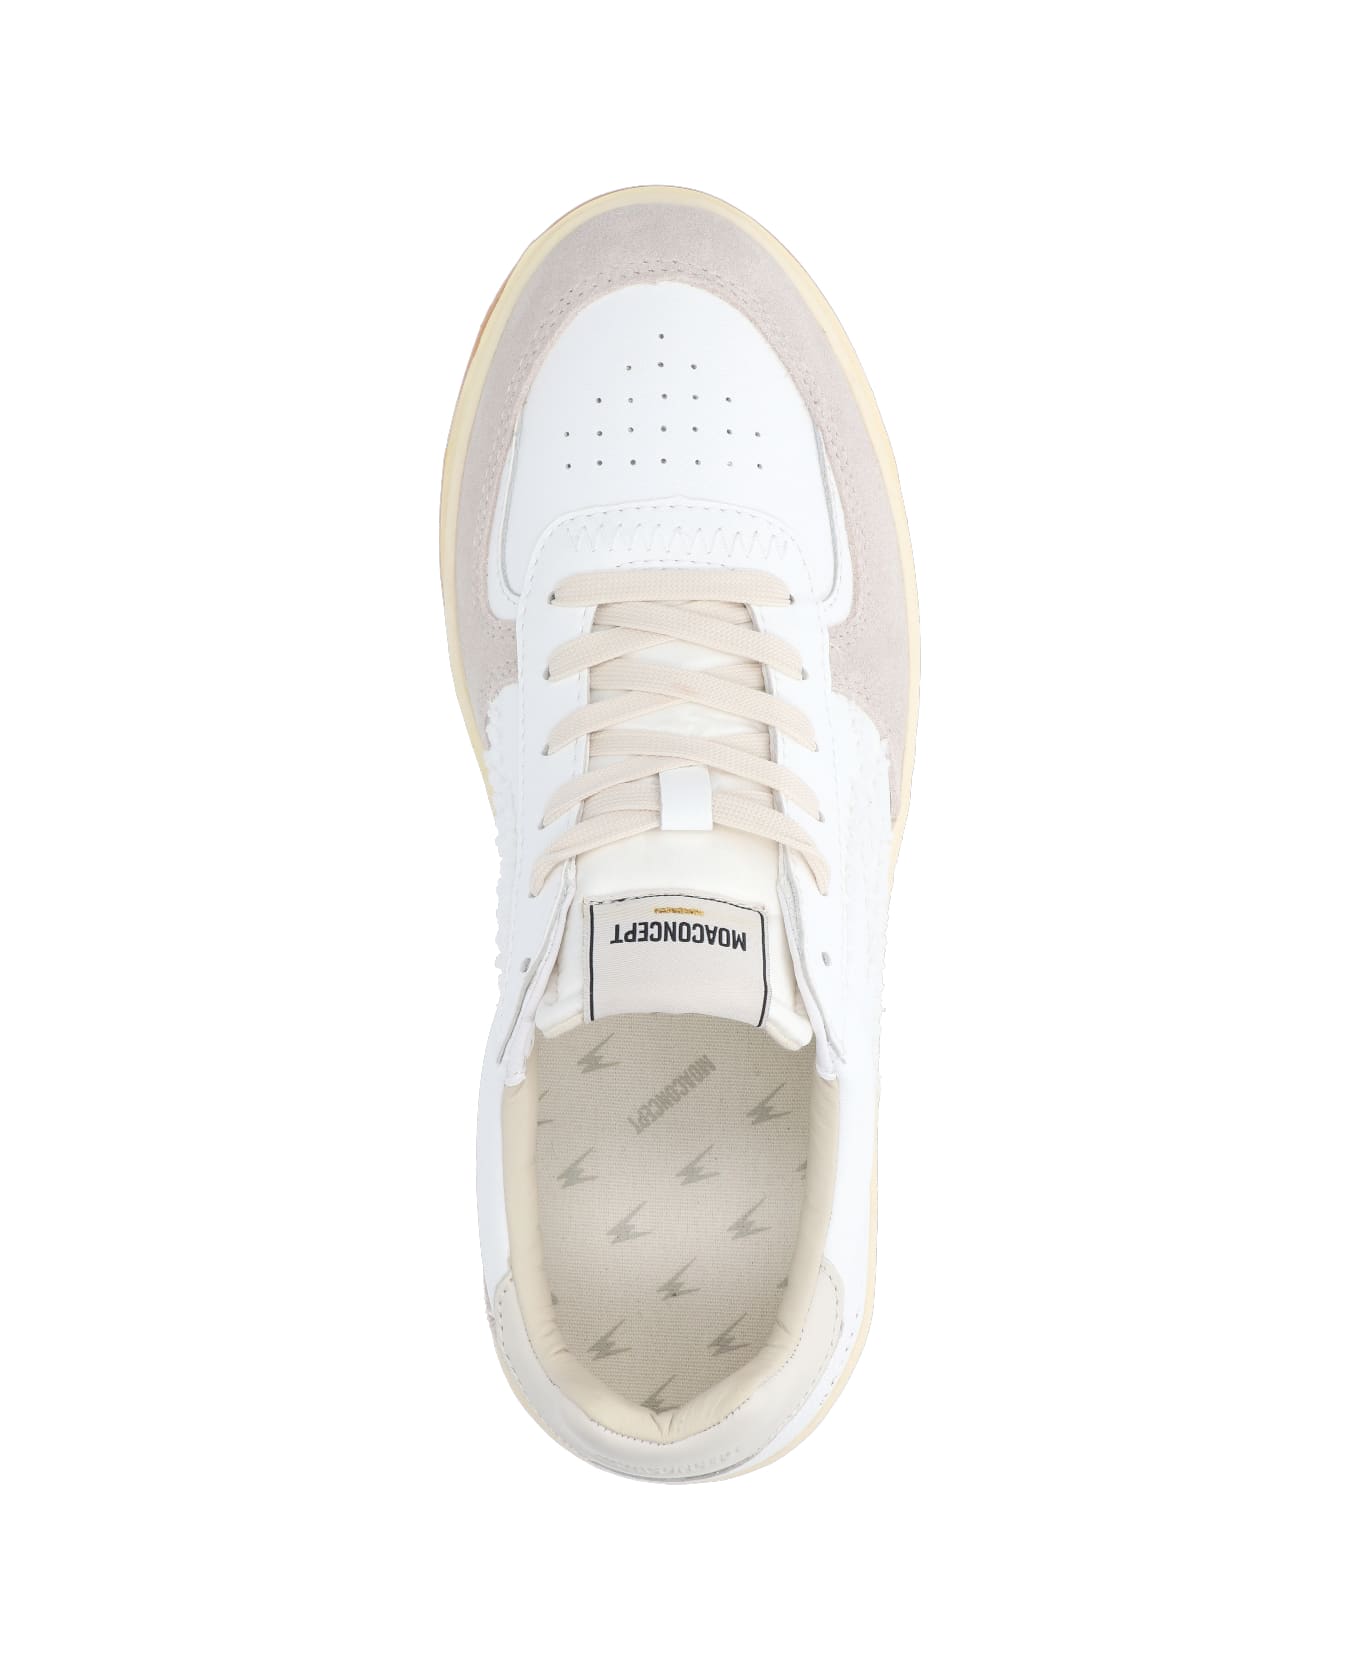 M.O.A. master of arts "legacy" Sneakers - White